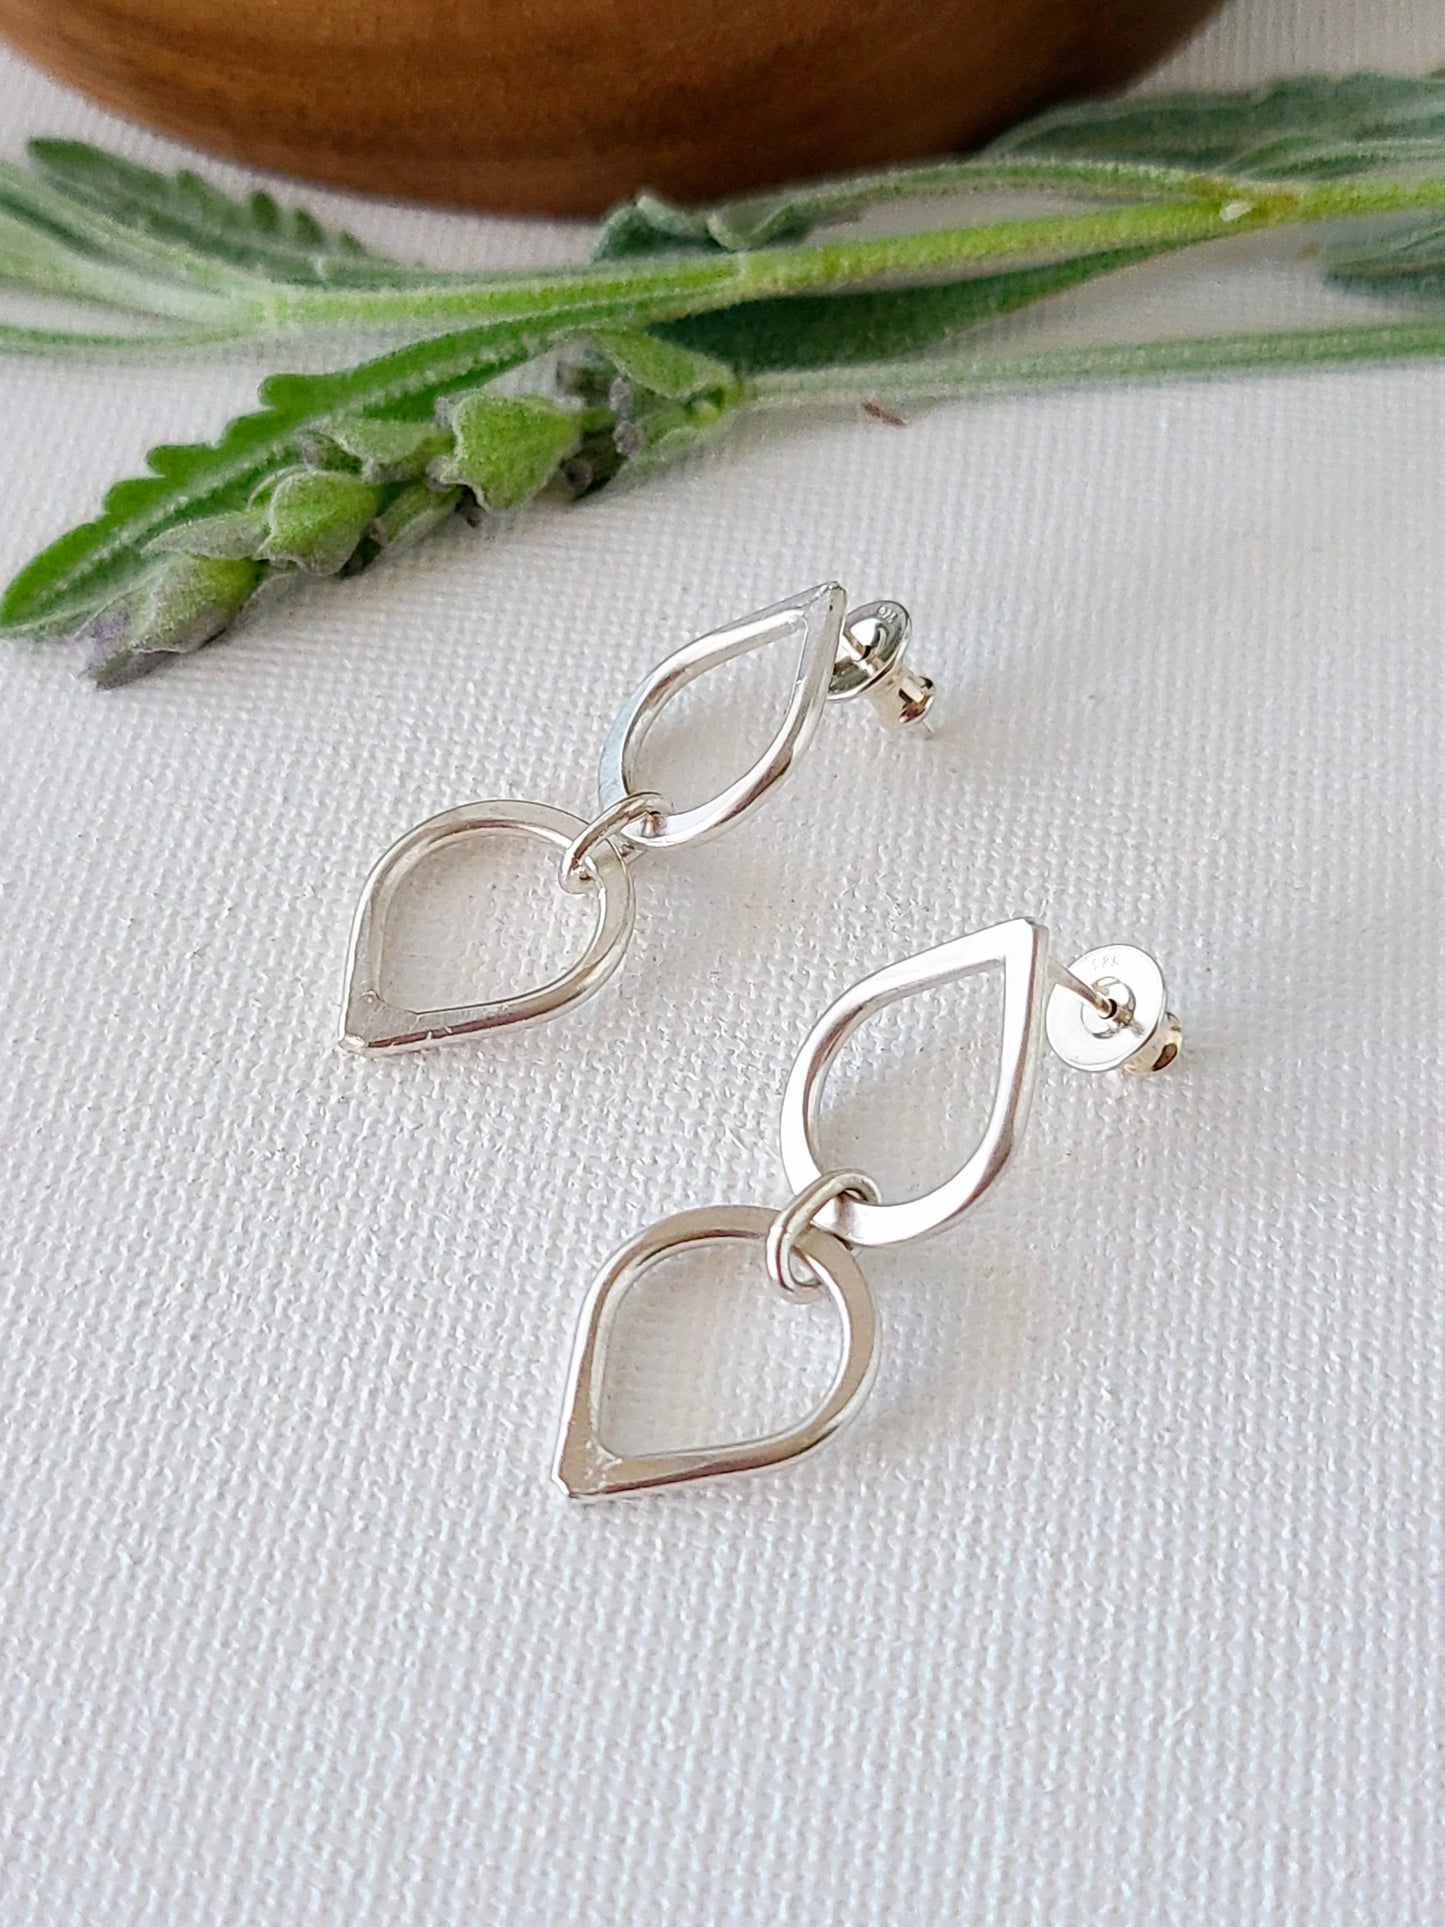 Silver Leaf Earrings with 2 drops-Dangle or Stud